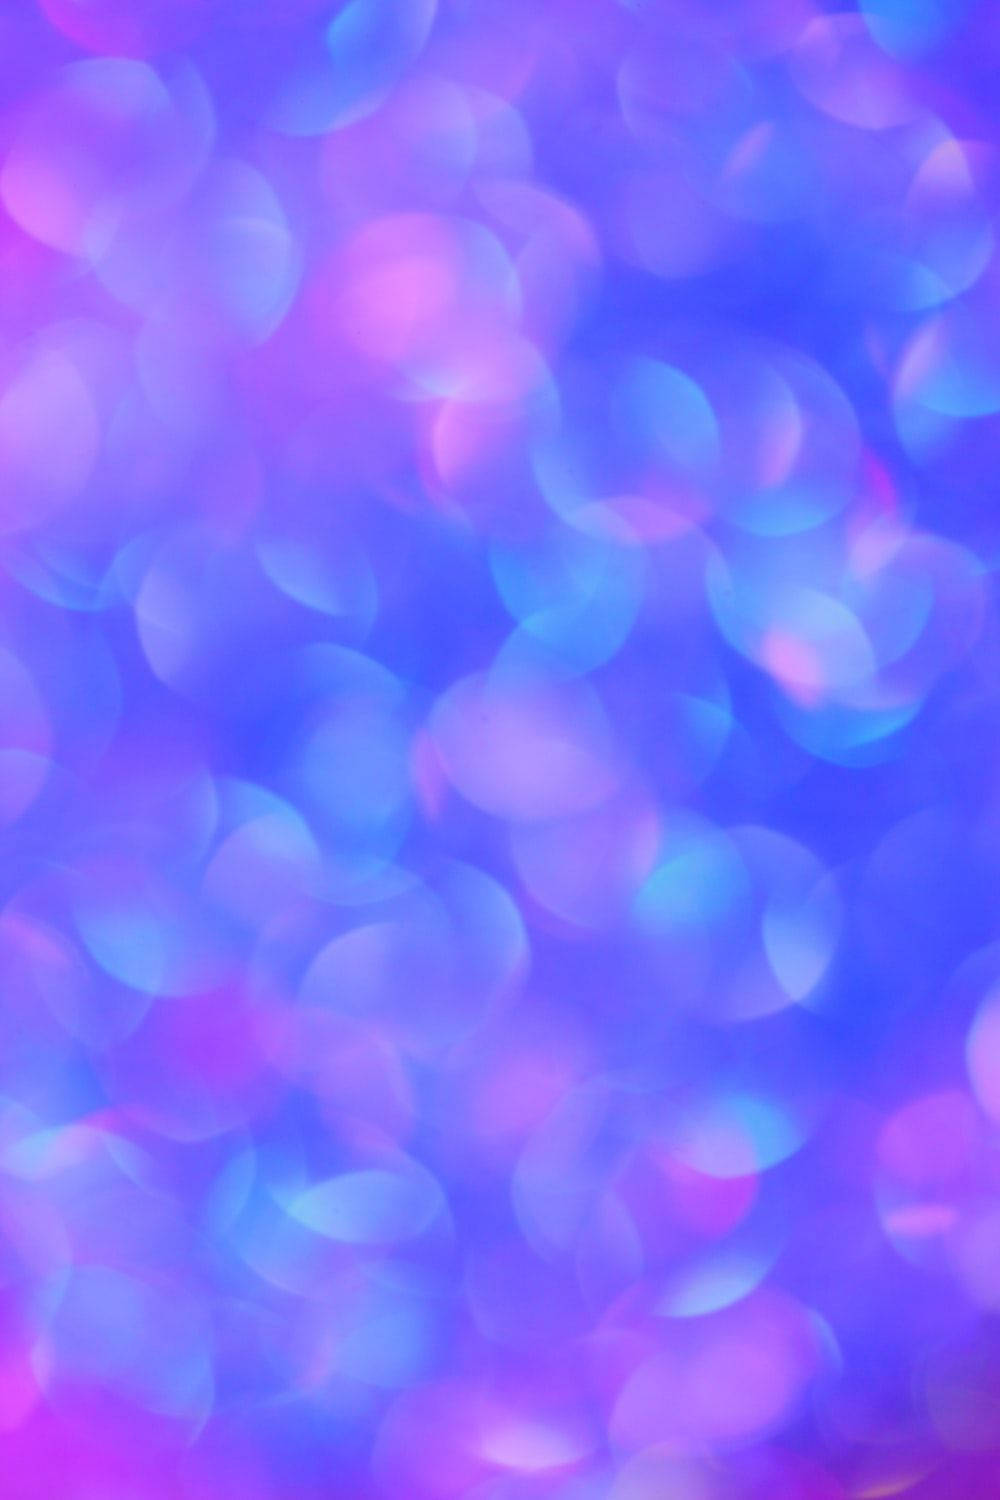 Blurred Light Sources In Light Purple Iphone Background